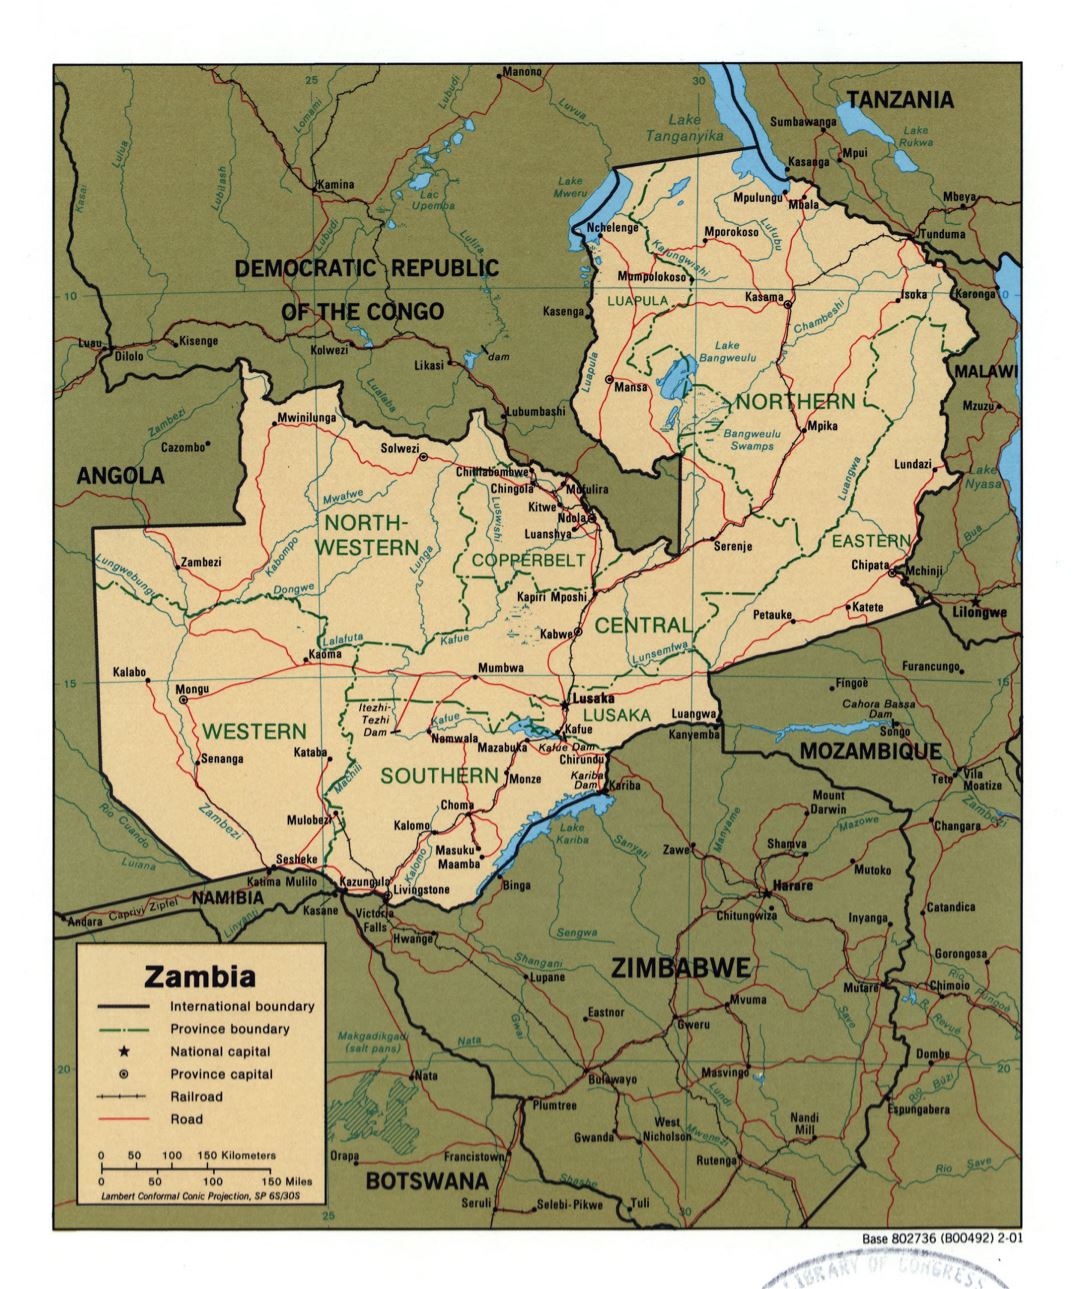 Large Detailed Political And Administrative Map Of Zambia With Roads Railroads And Major Cities 2001 Small 